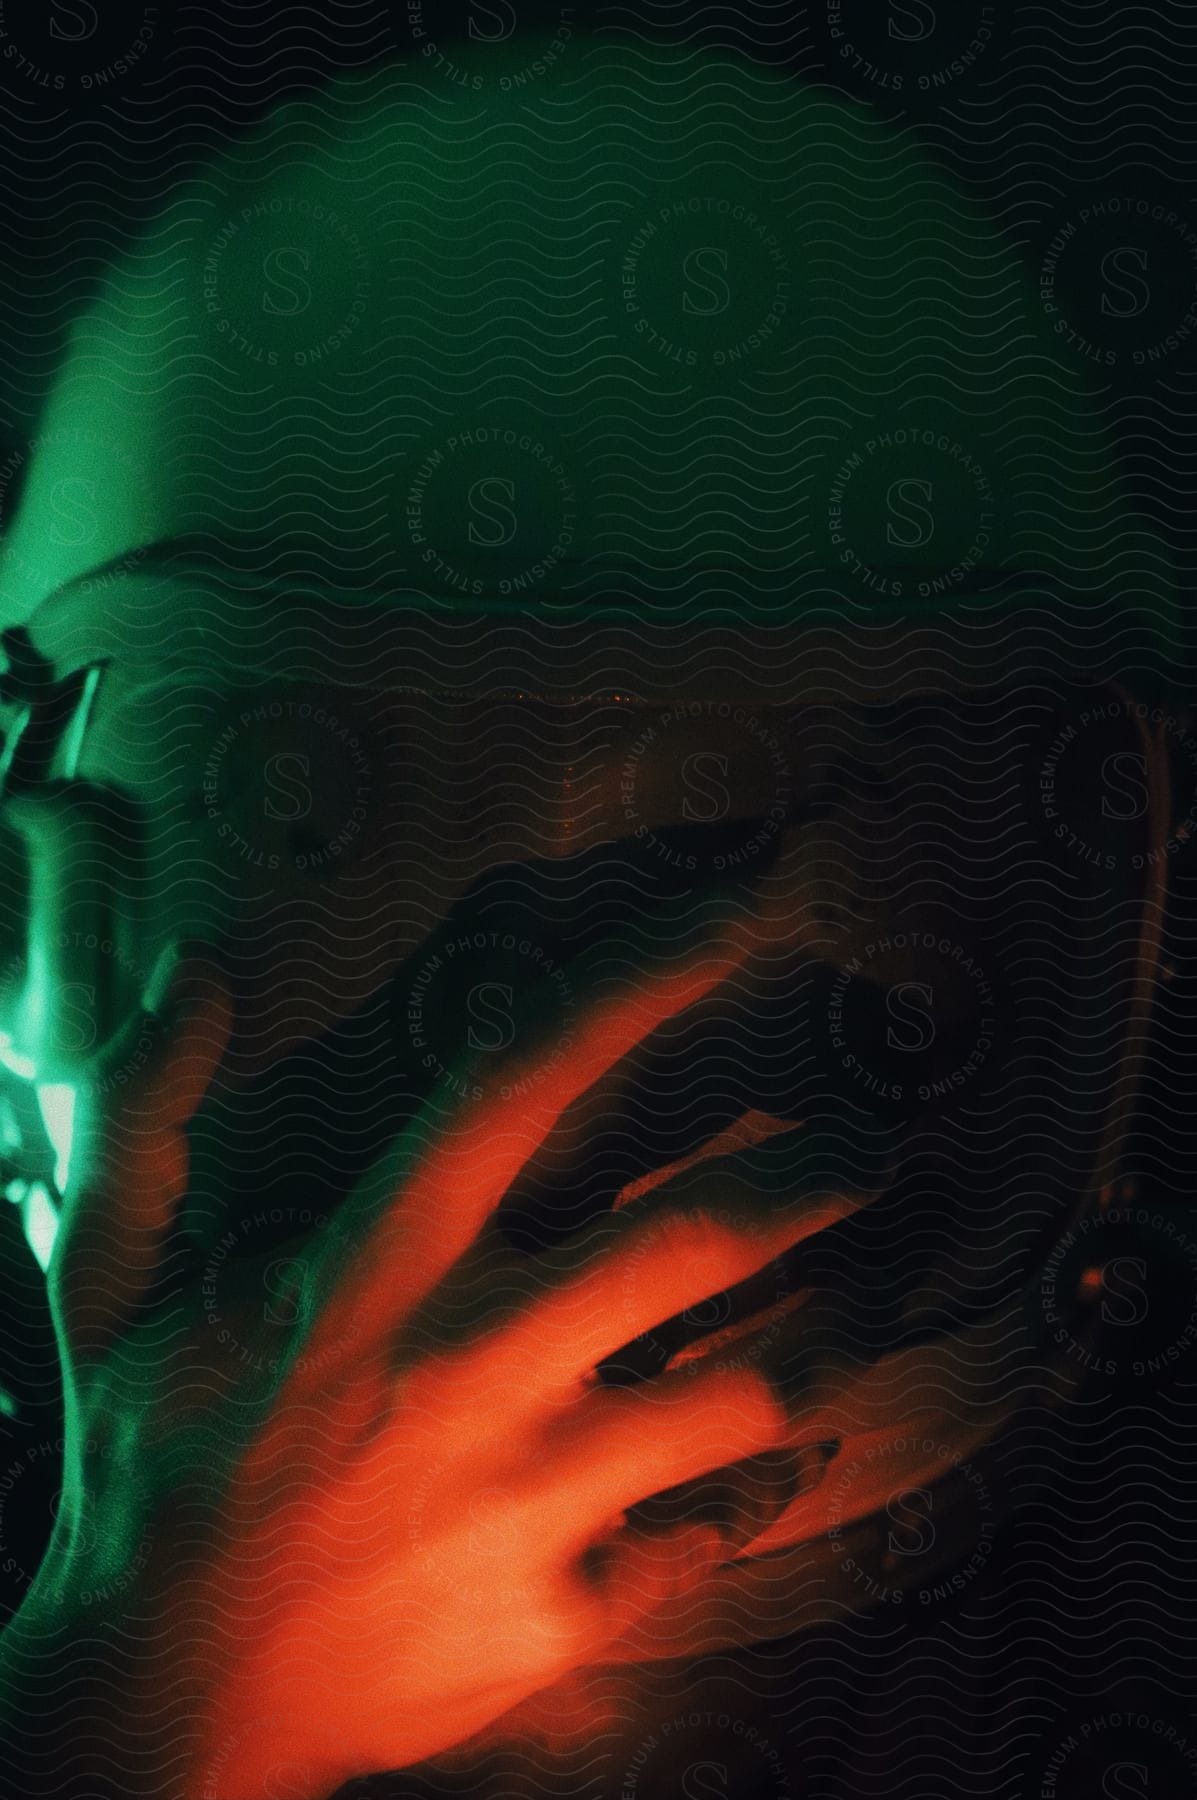 Red light shines on a mans hand in front of the VR helmet he is wearing in the darkness as green light shines in the distance